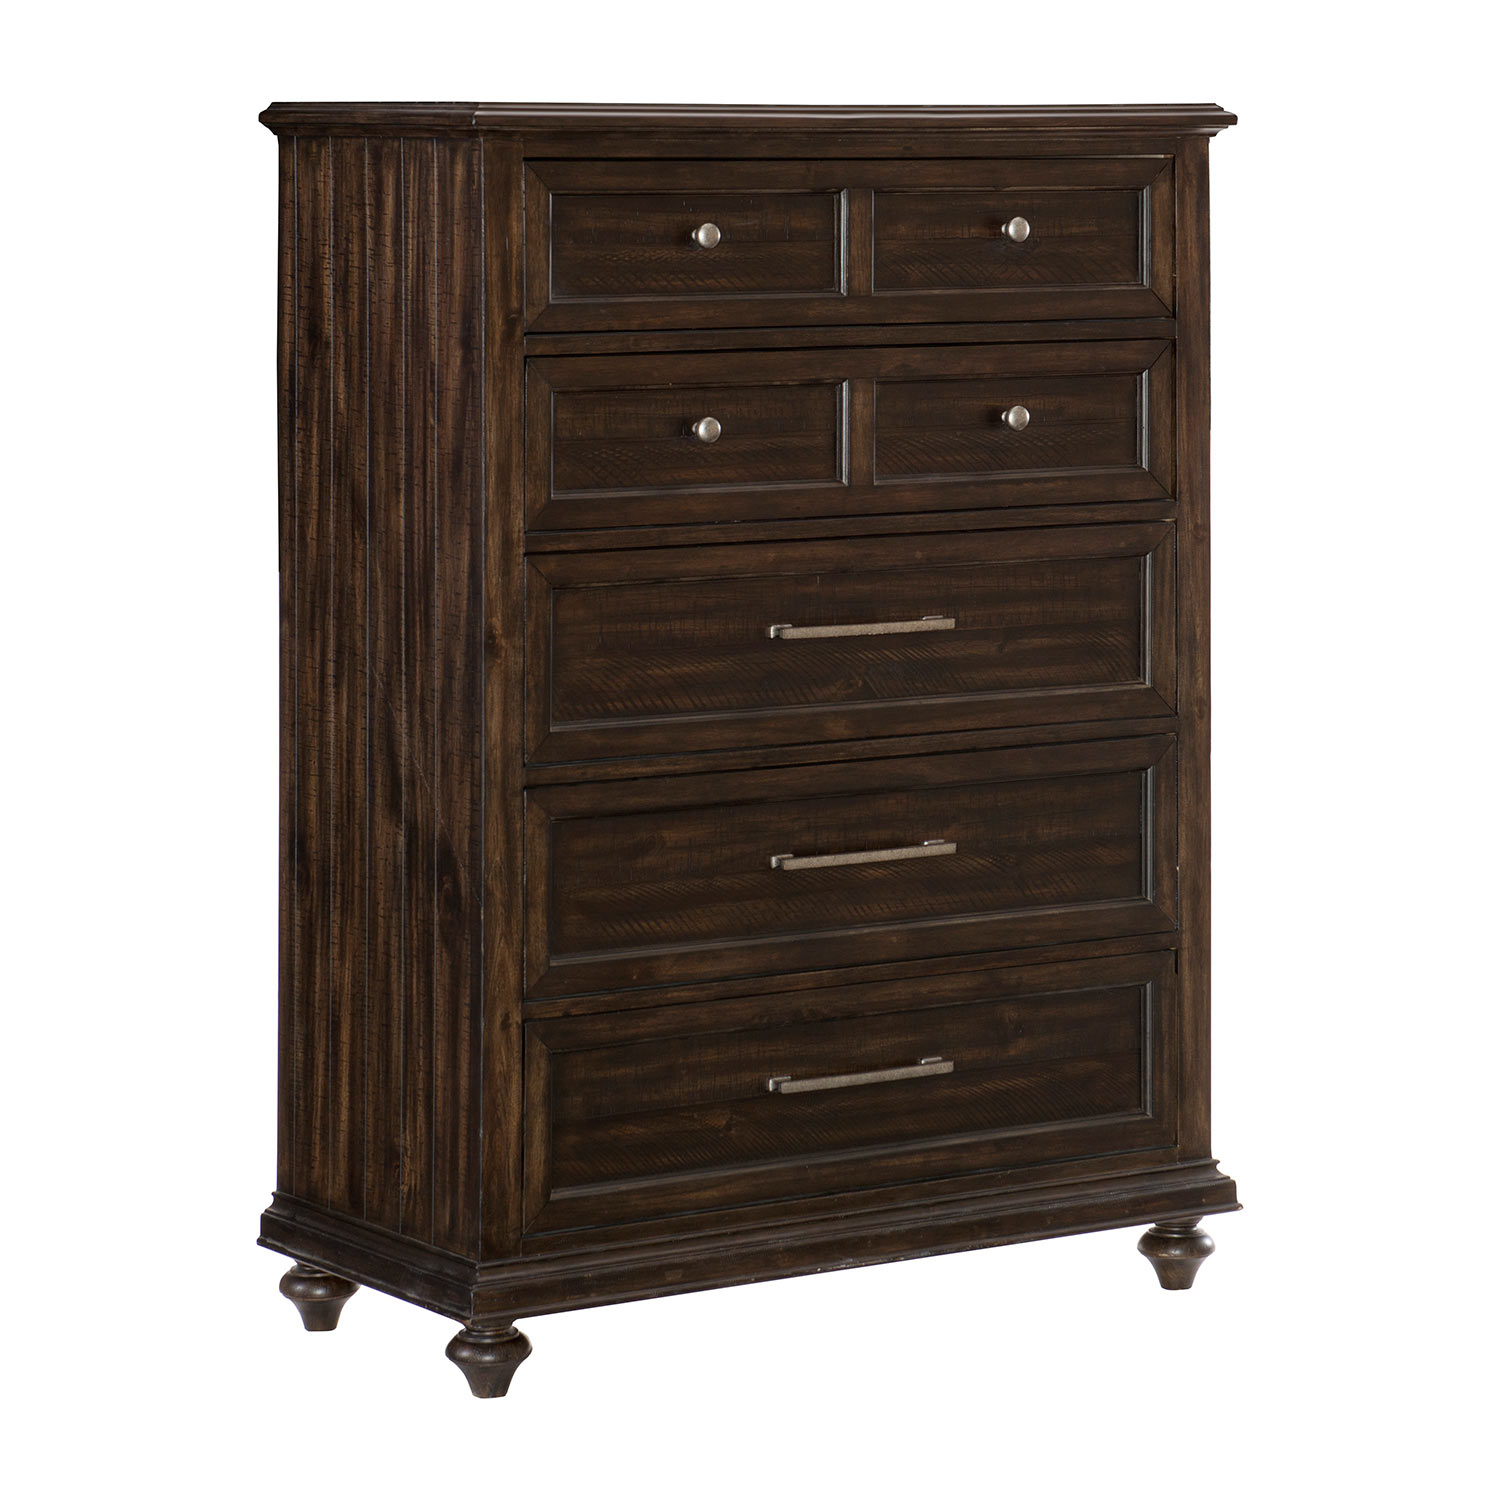 Homelegance Cardano Chest - Driftwood Charcoal over Acacia Solids and Veneers